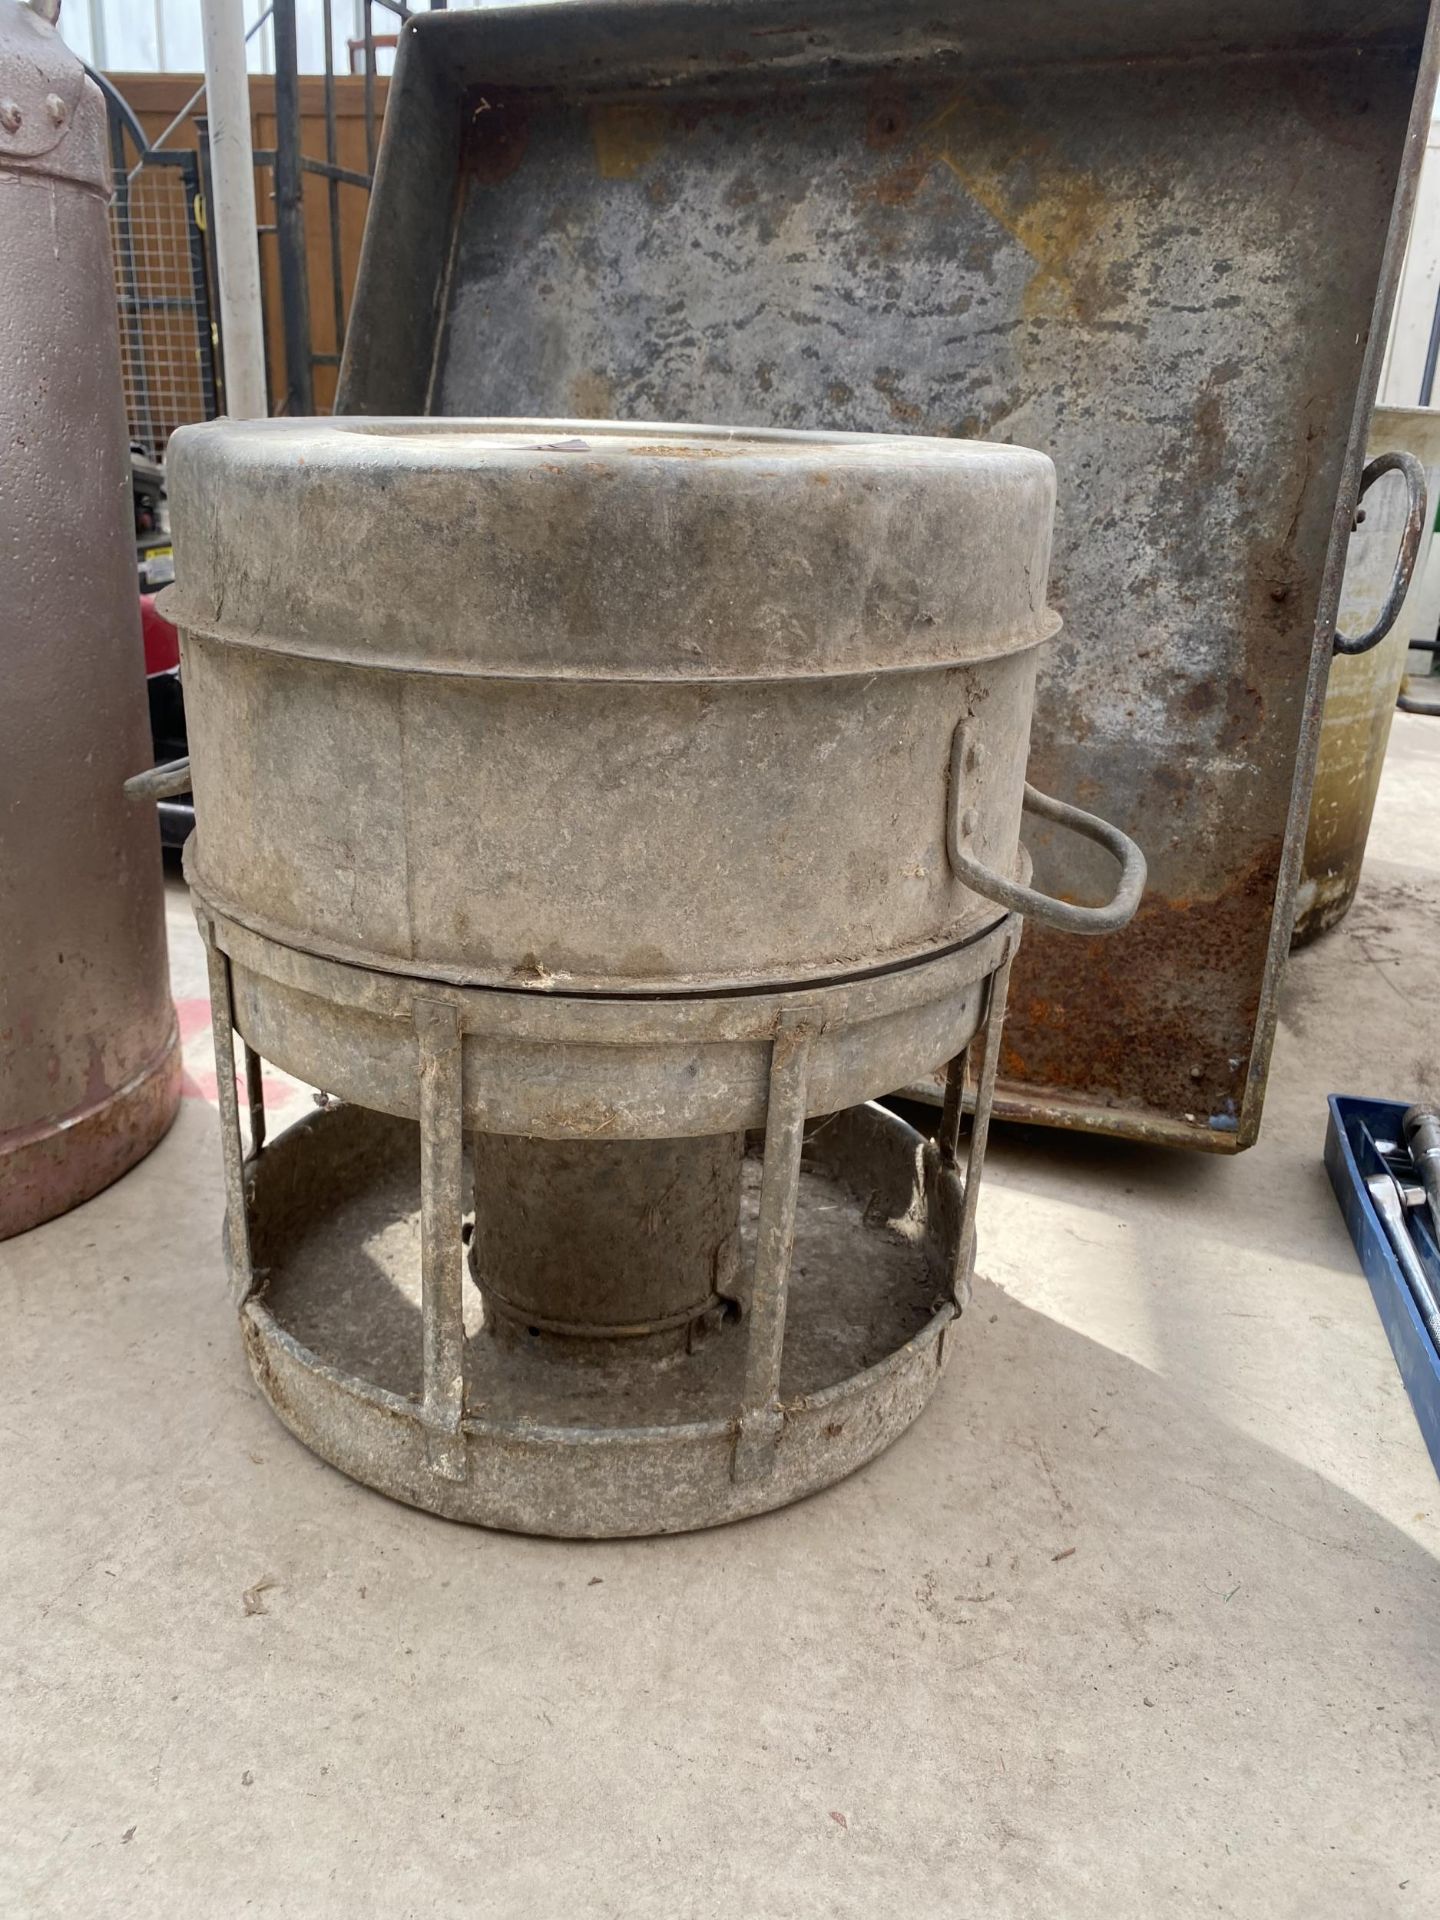 A VINTAGE GALVANISED SWIFTS POULTRY FEEDER AND A LARGE GALVANISED METAL TRAY - Image 2 of 2